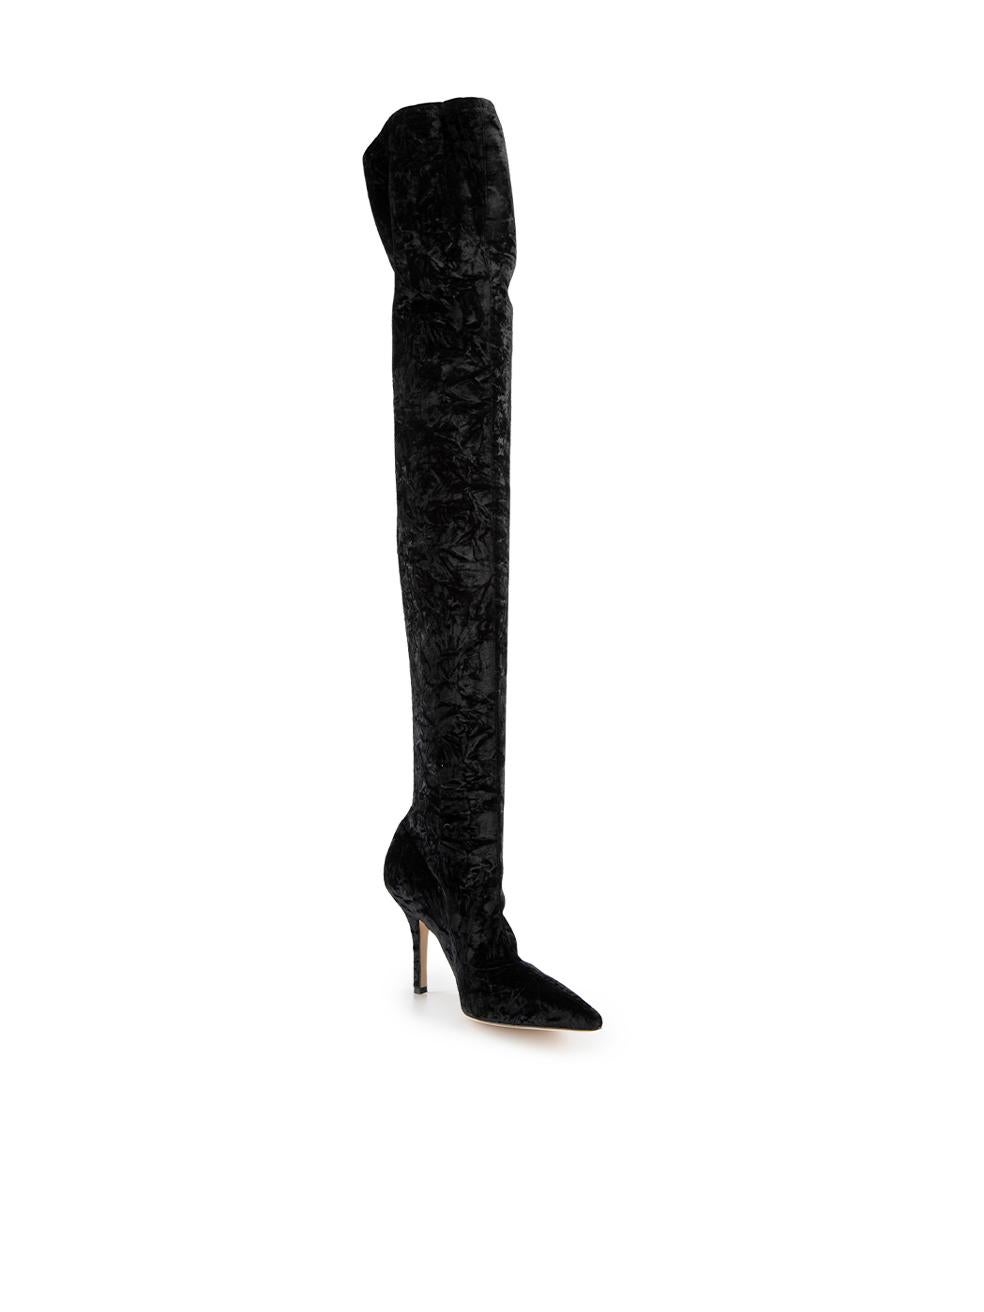 CONDITION is Never Worn. No visible wear to boots is evident on this used Paris Texas designer resale item. 



Details


Black

Velvet

Over the knee boots

Pointed toe

High heel





Made in Italy



Composition

EXTERIOR: Velvet

INTERIOR: